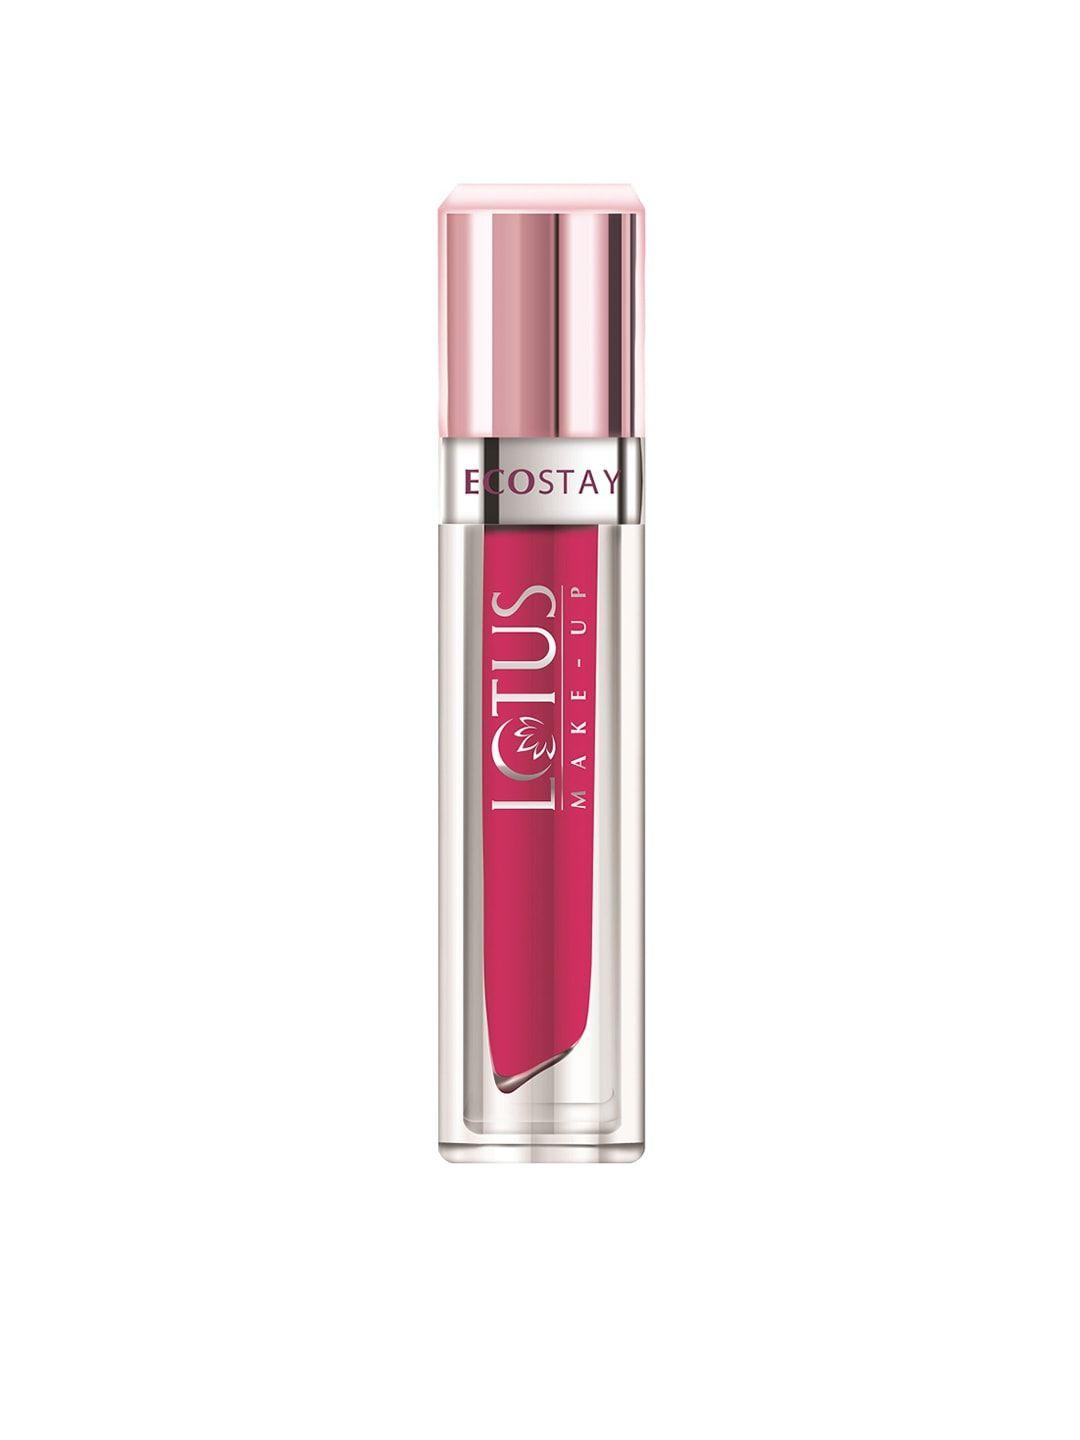 lotus herbals sustainable make-up ecostay matte lip lacquer - fuchsia girl el03 4gm